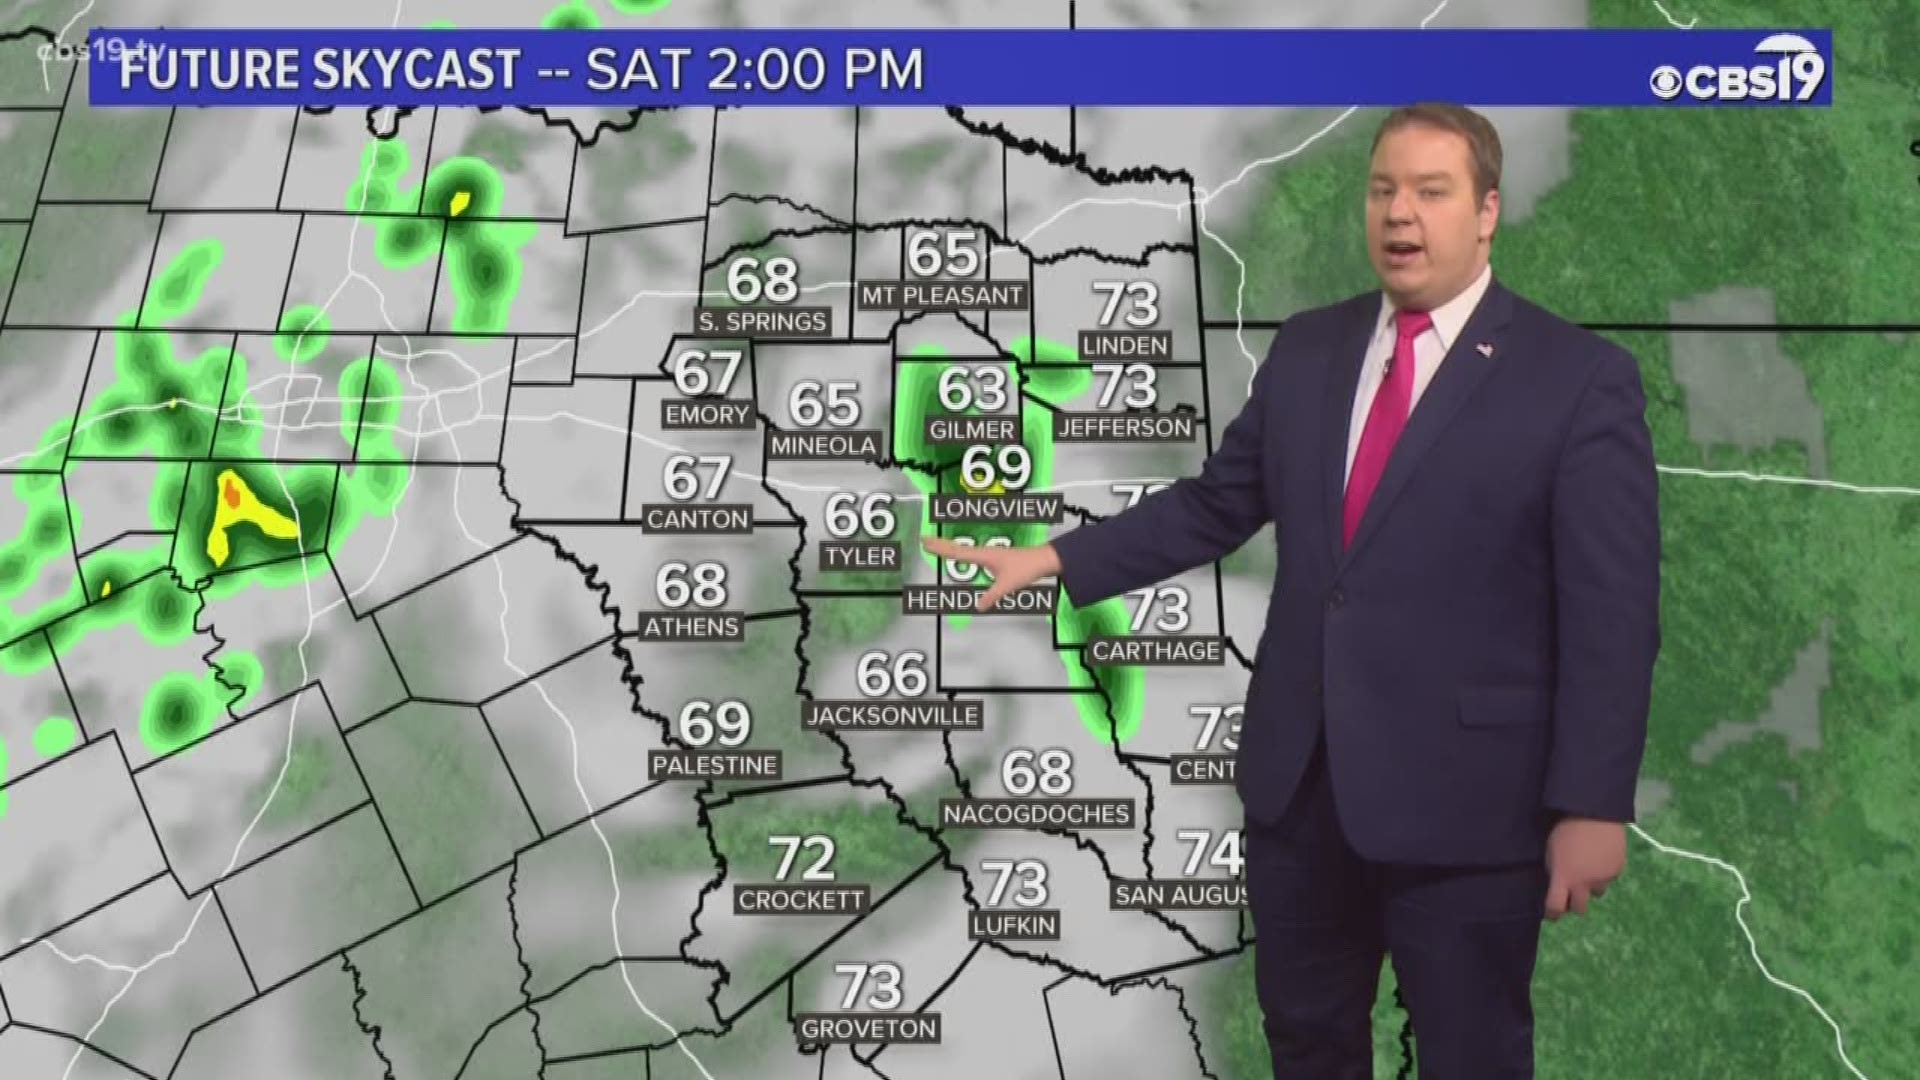 We are looking at more gorgeous weather for Friday in East Texas, but Meteorologist Michael Behrens says rain is on the way this weekend. Watch his latest forecast to find out when!